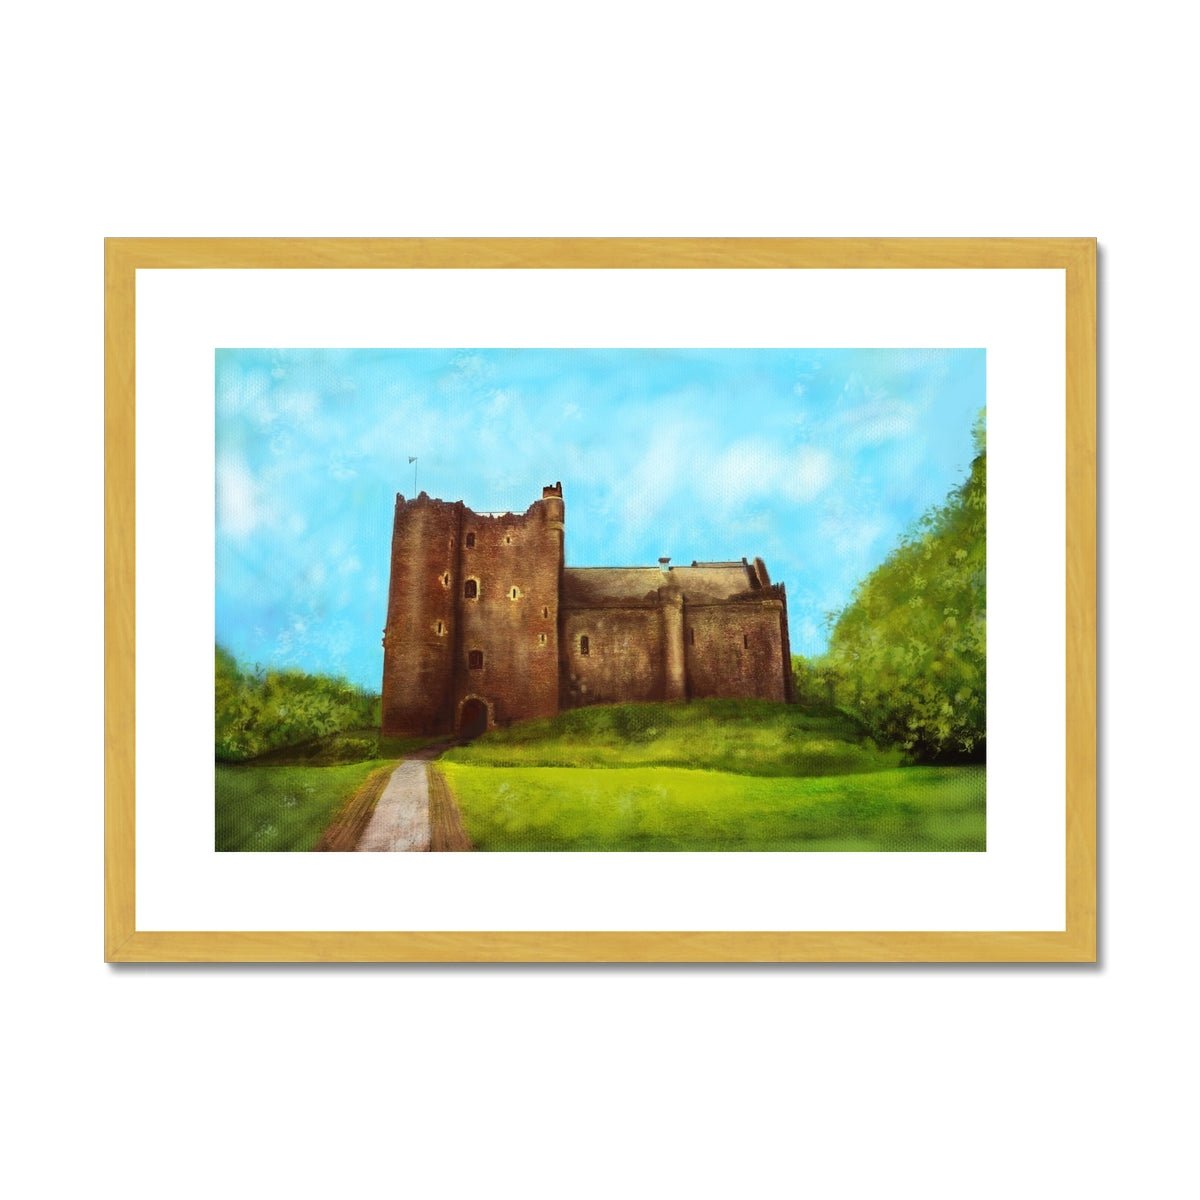 Doune Castle Painting | Antique Framed & Mounted Prints From Scotland-Antique Framed & Mounted Prints-Historic & Iconic Scotland Art Gallery-A2 Landscape-Gold Frame-Paintings, Prints, Homeware, Art Gifts From Scotland By Scottish Artist Kevin Hunter